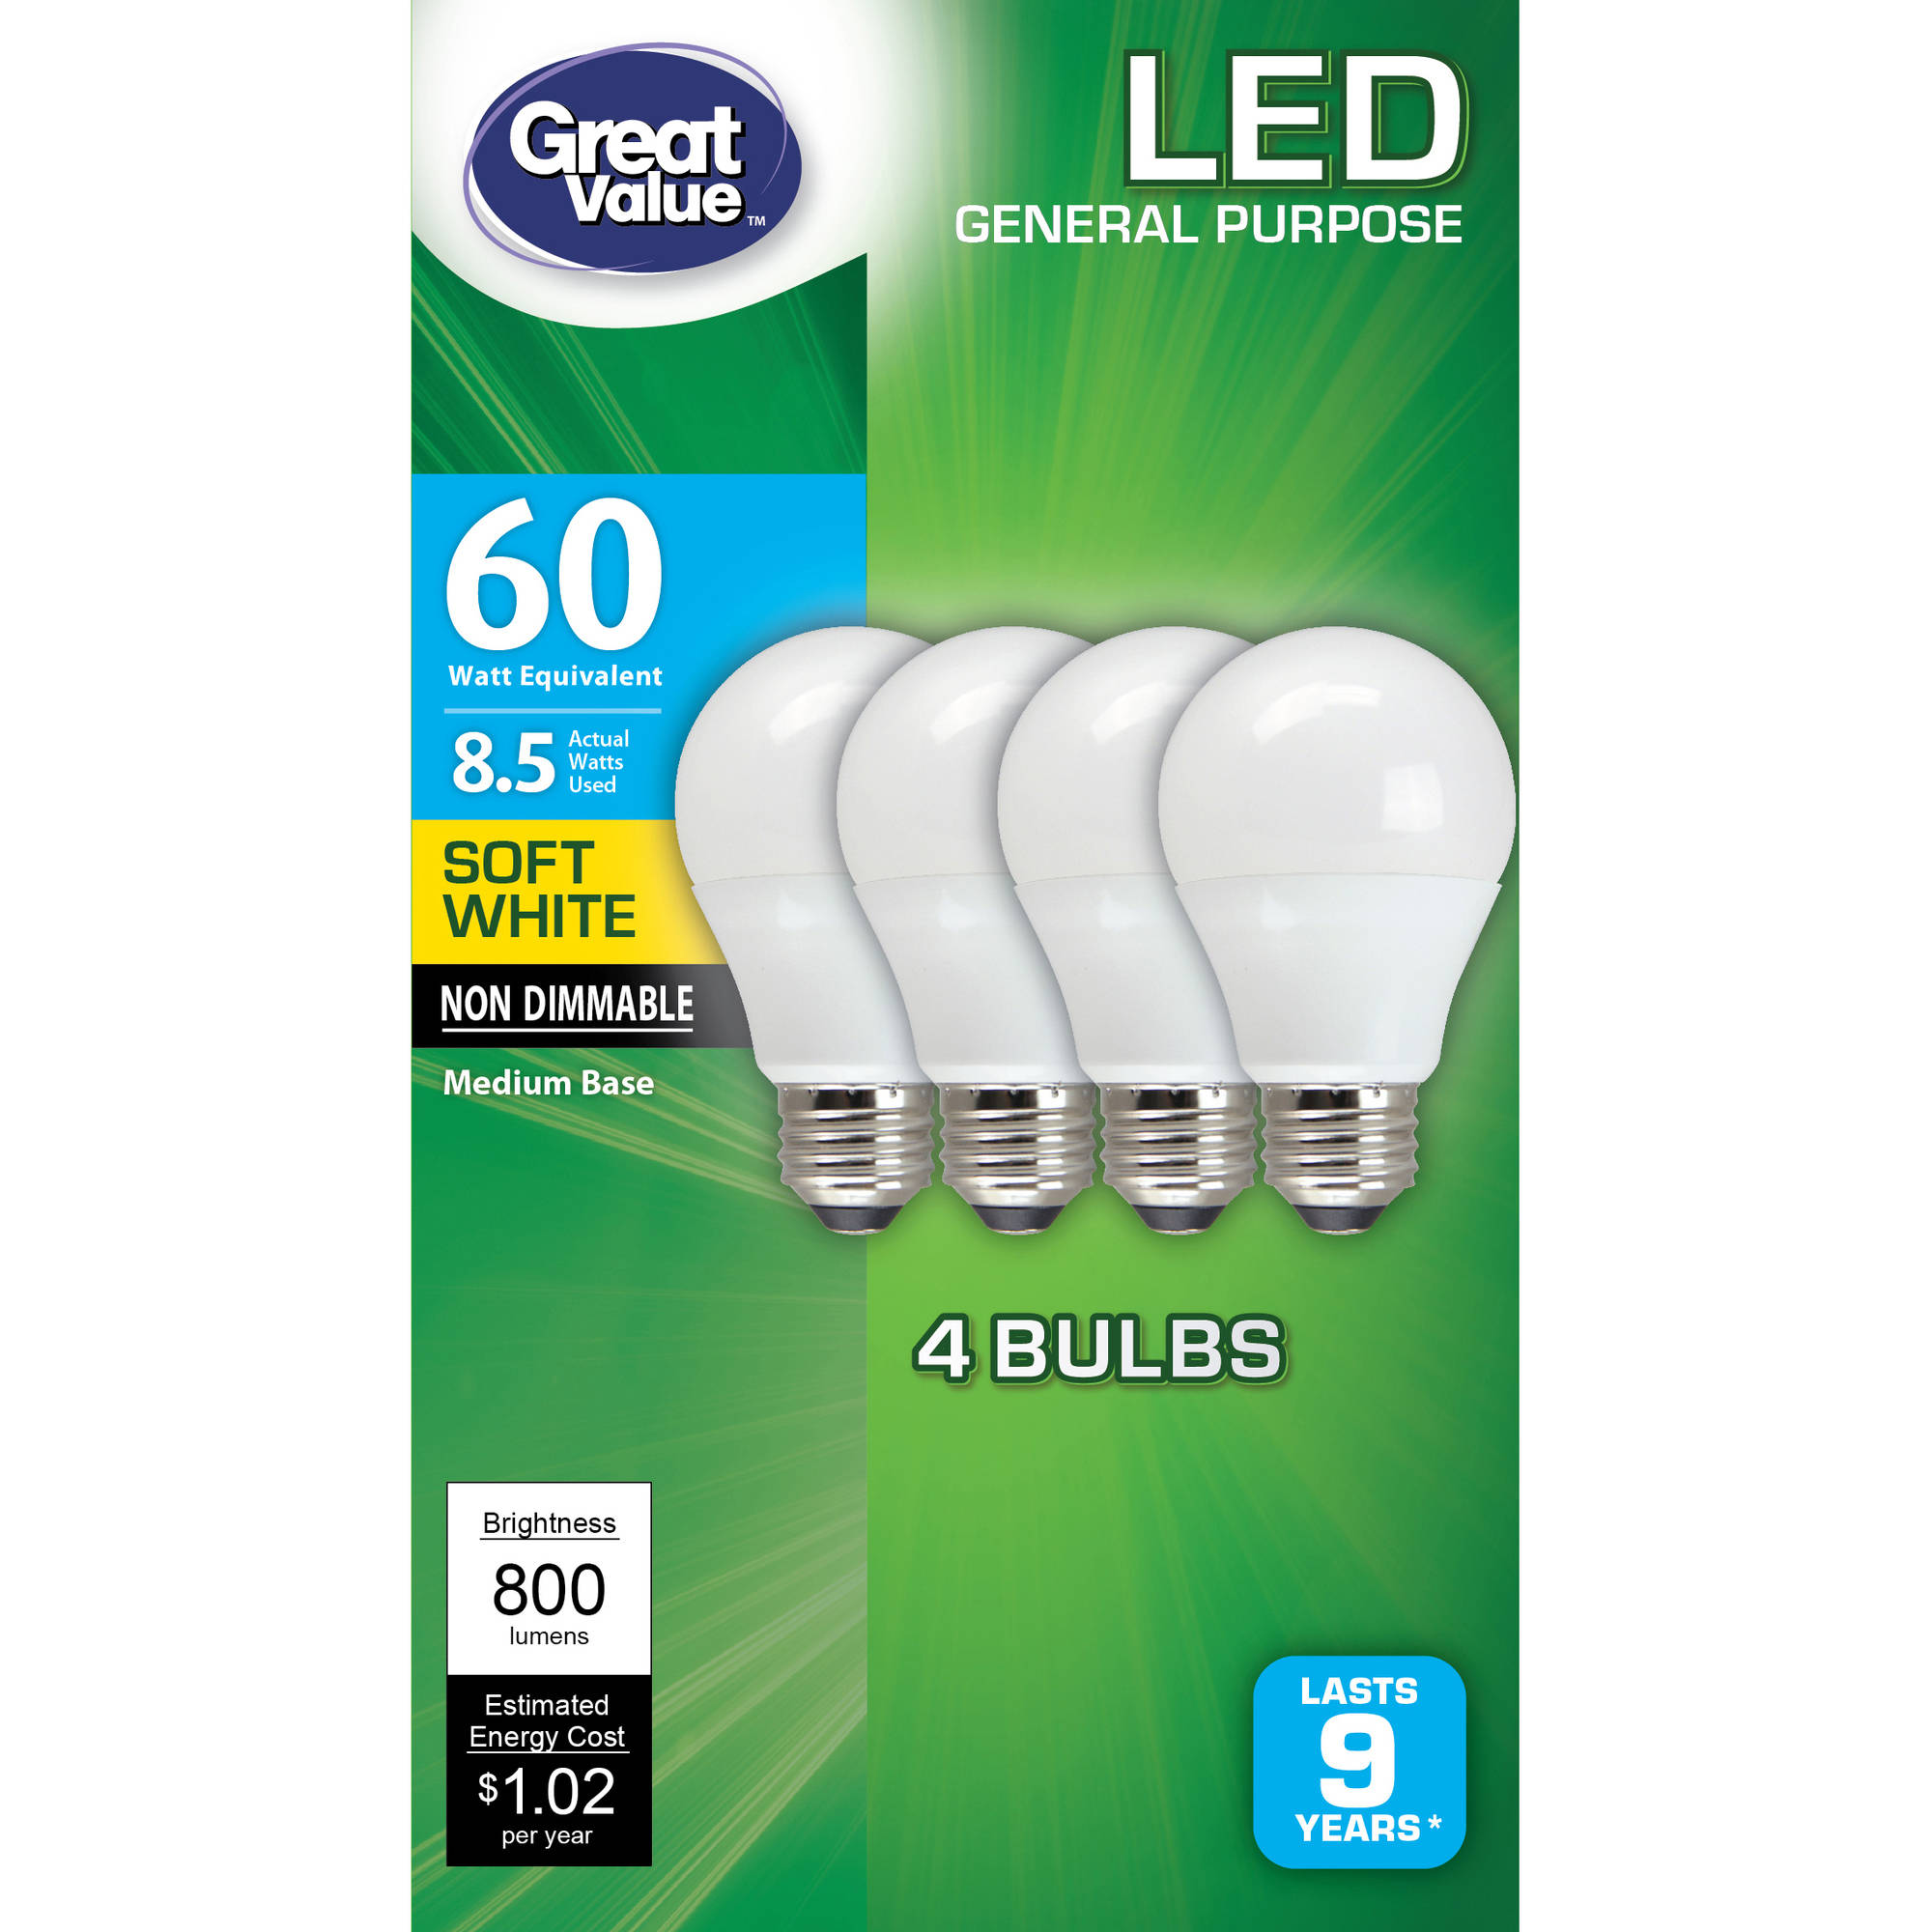 Great Value LED Light Bulbs (60 Equivalent) 4 Count Only $4.97!